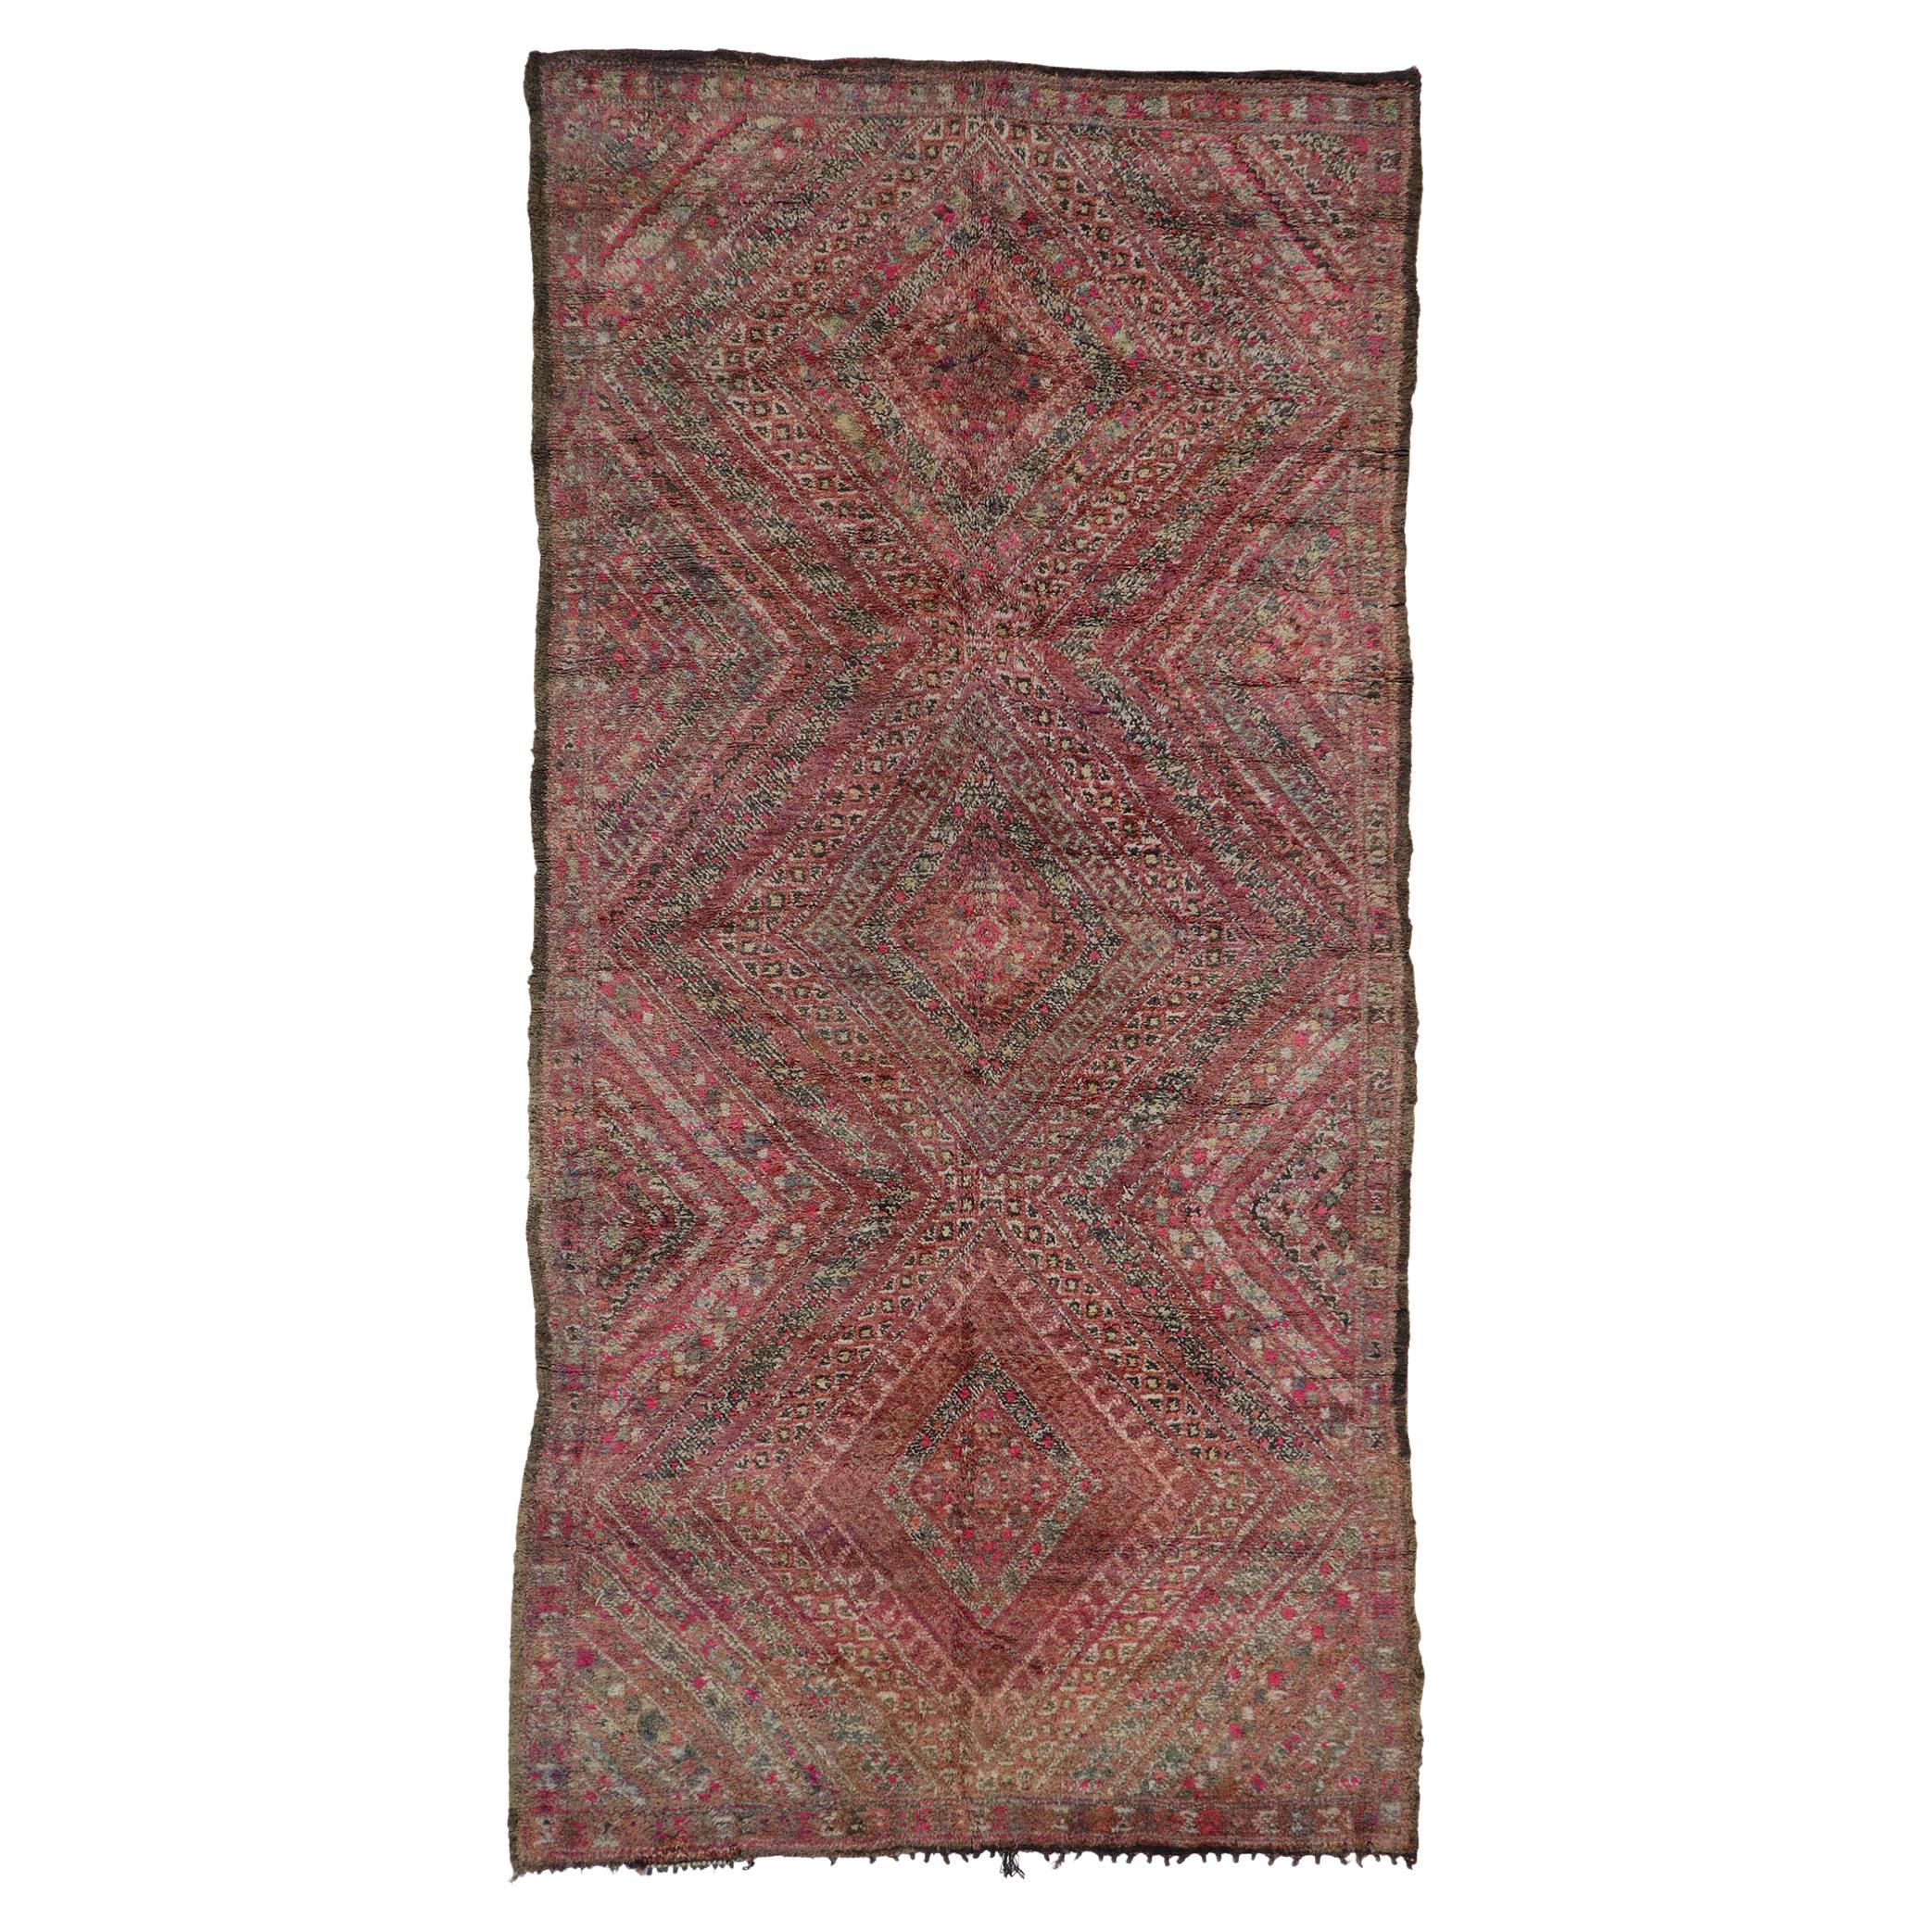 Vintage Berber Zayane Moroccan Rug with Bohemian Style